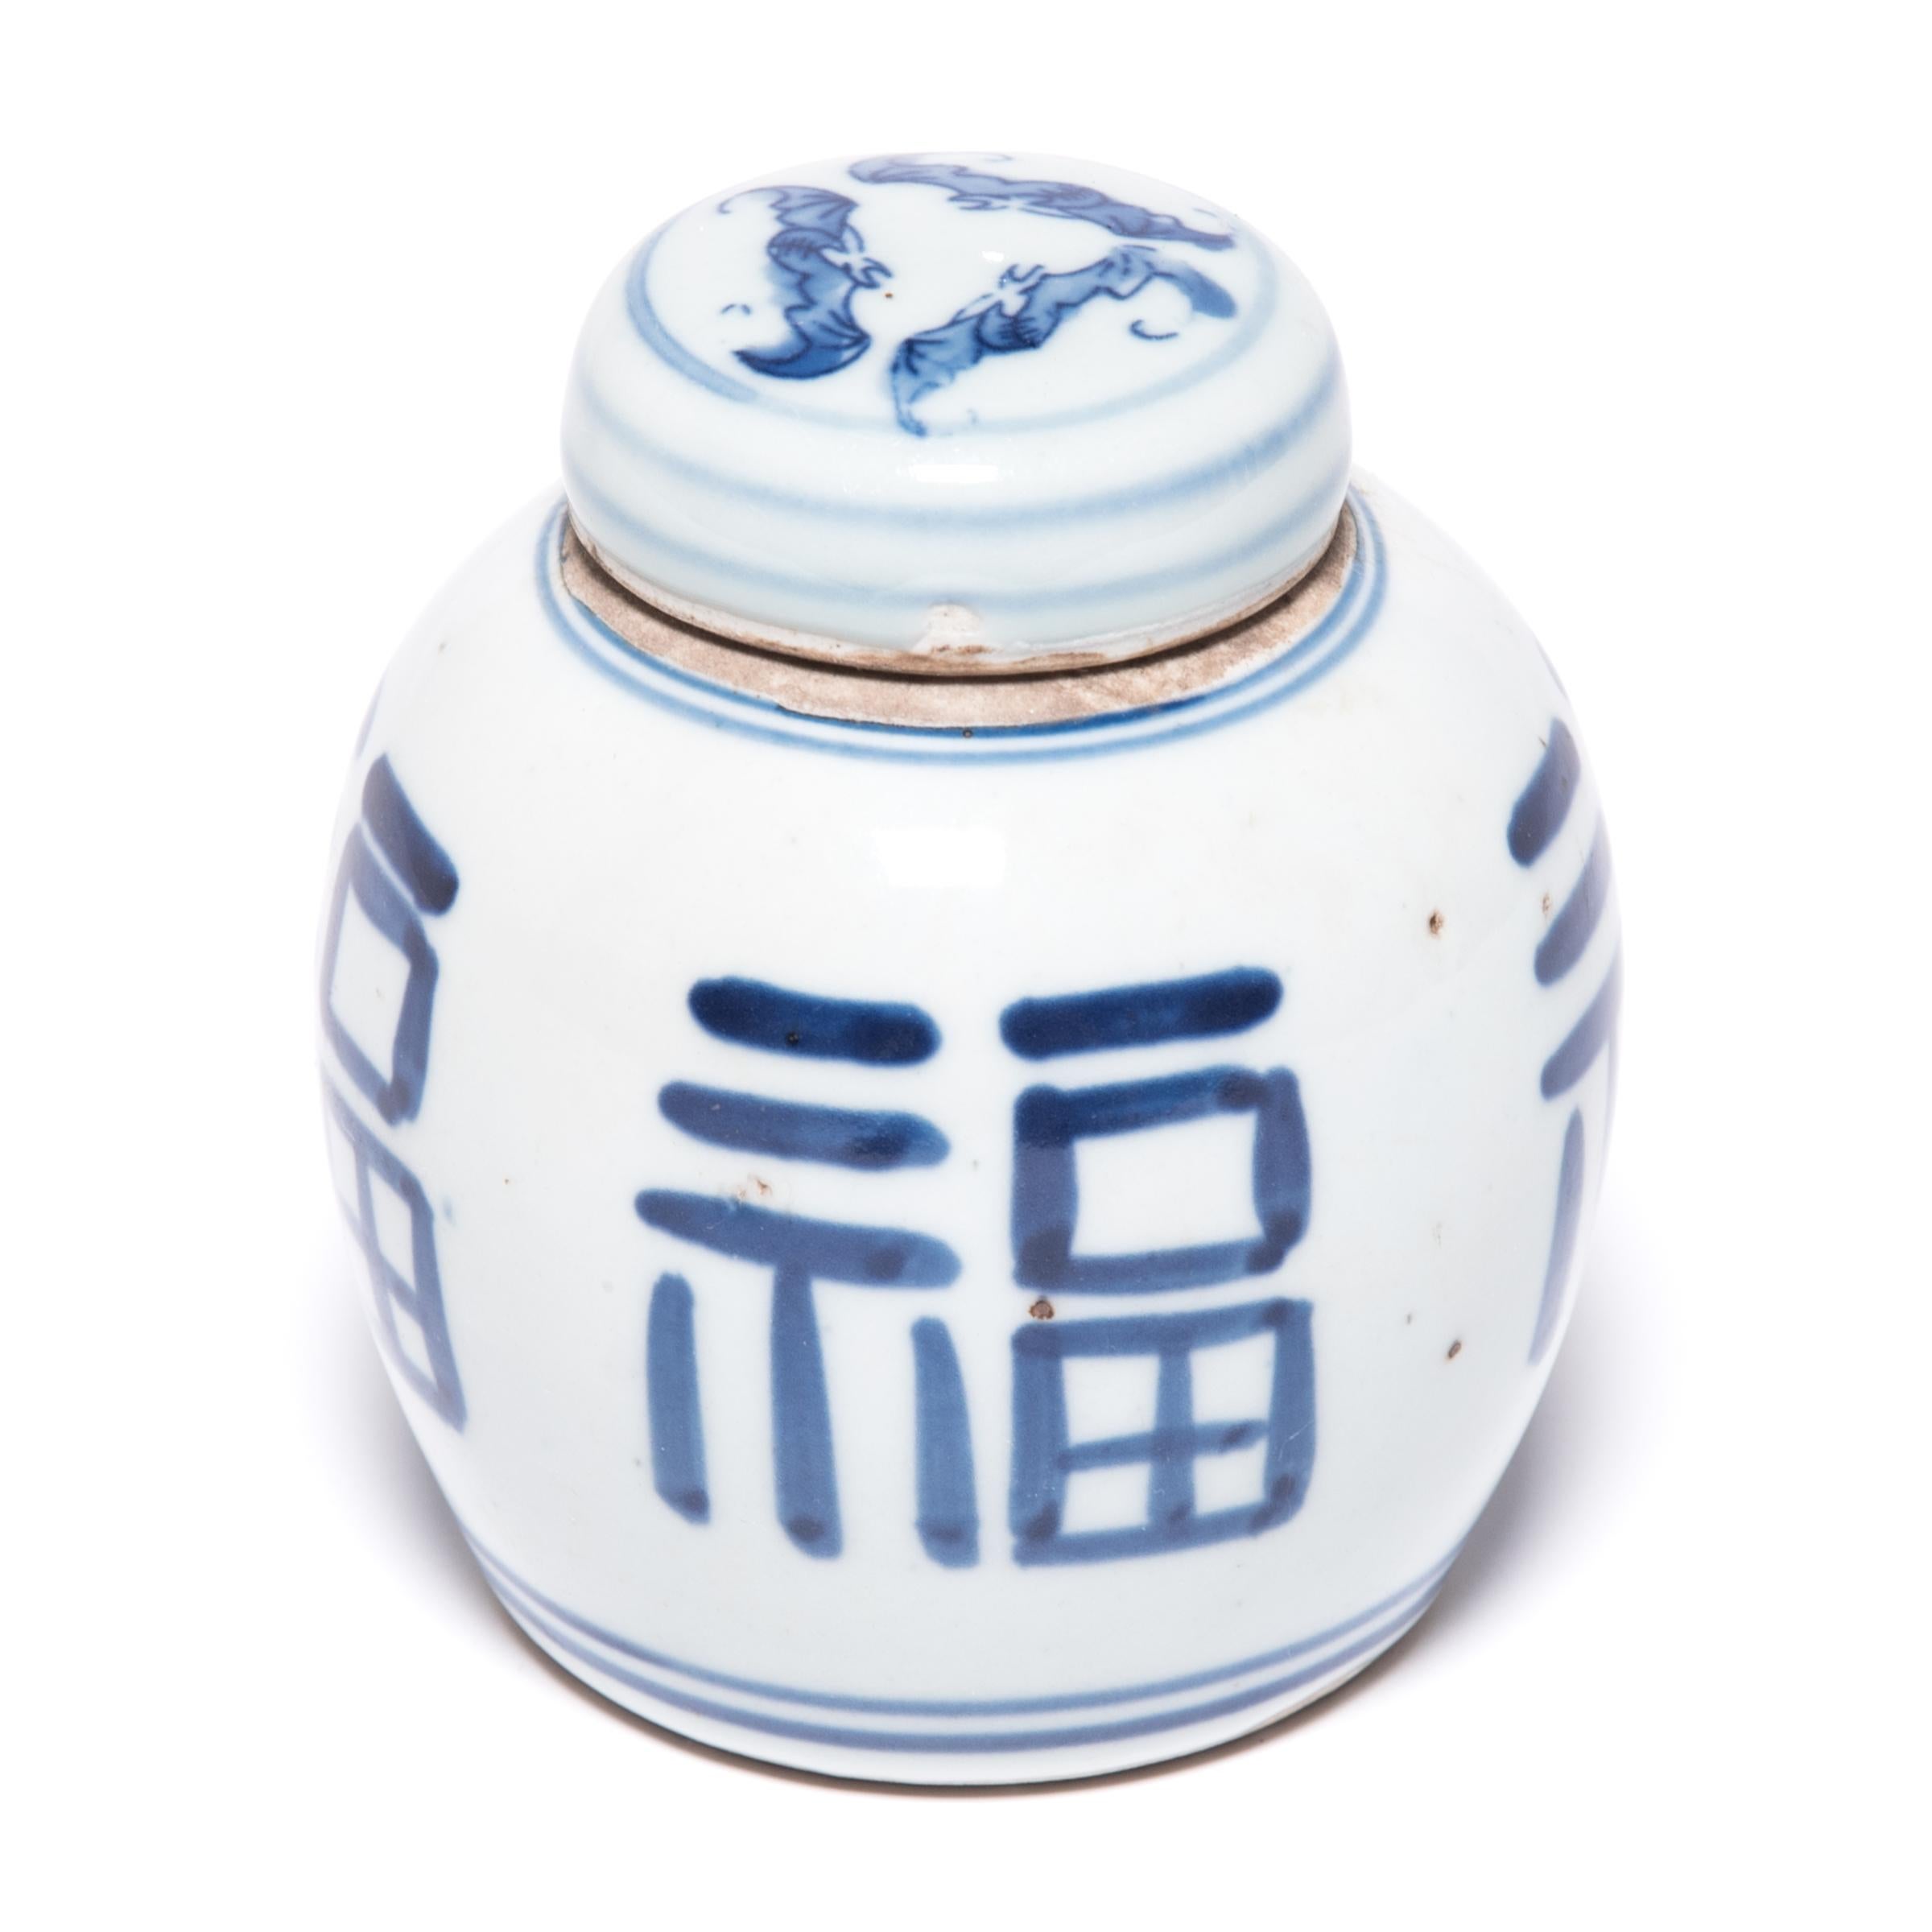 Painted in the Classic blue and white manner, this petite ginger jar is marked with an abstracted version of the Fu character, a symbol of prosperity and good fortune. Sculpted at the turn of the 20th century, this jar has a clean design and graphic